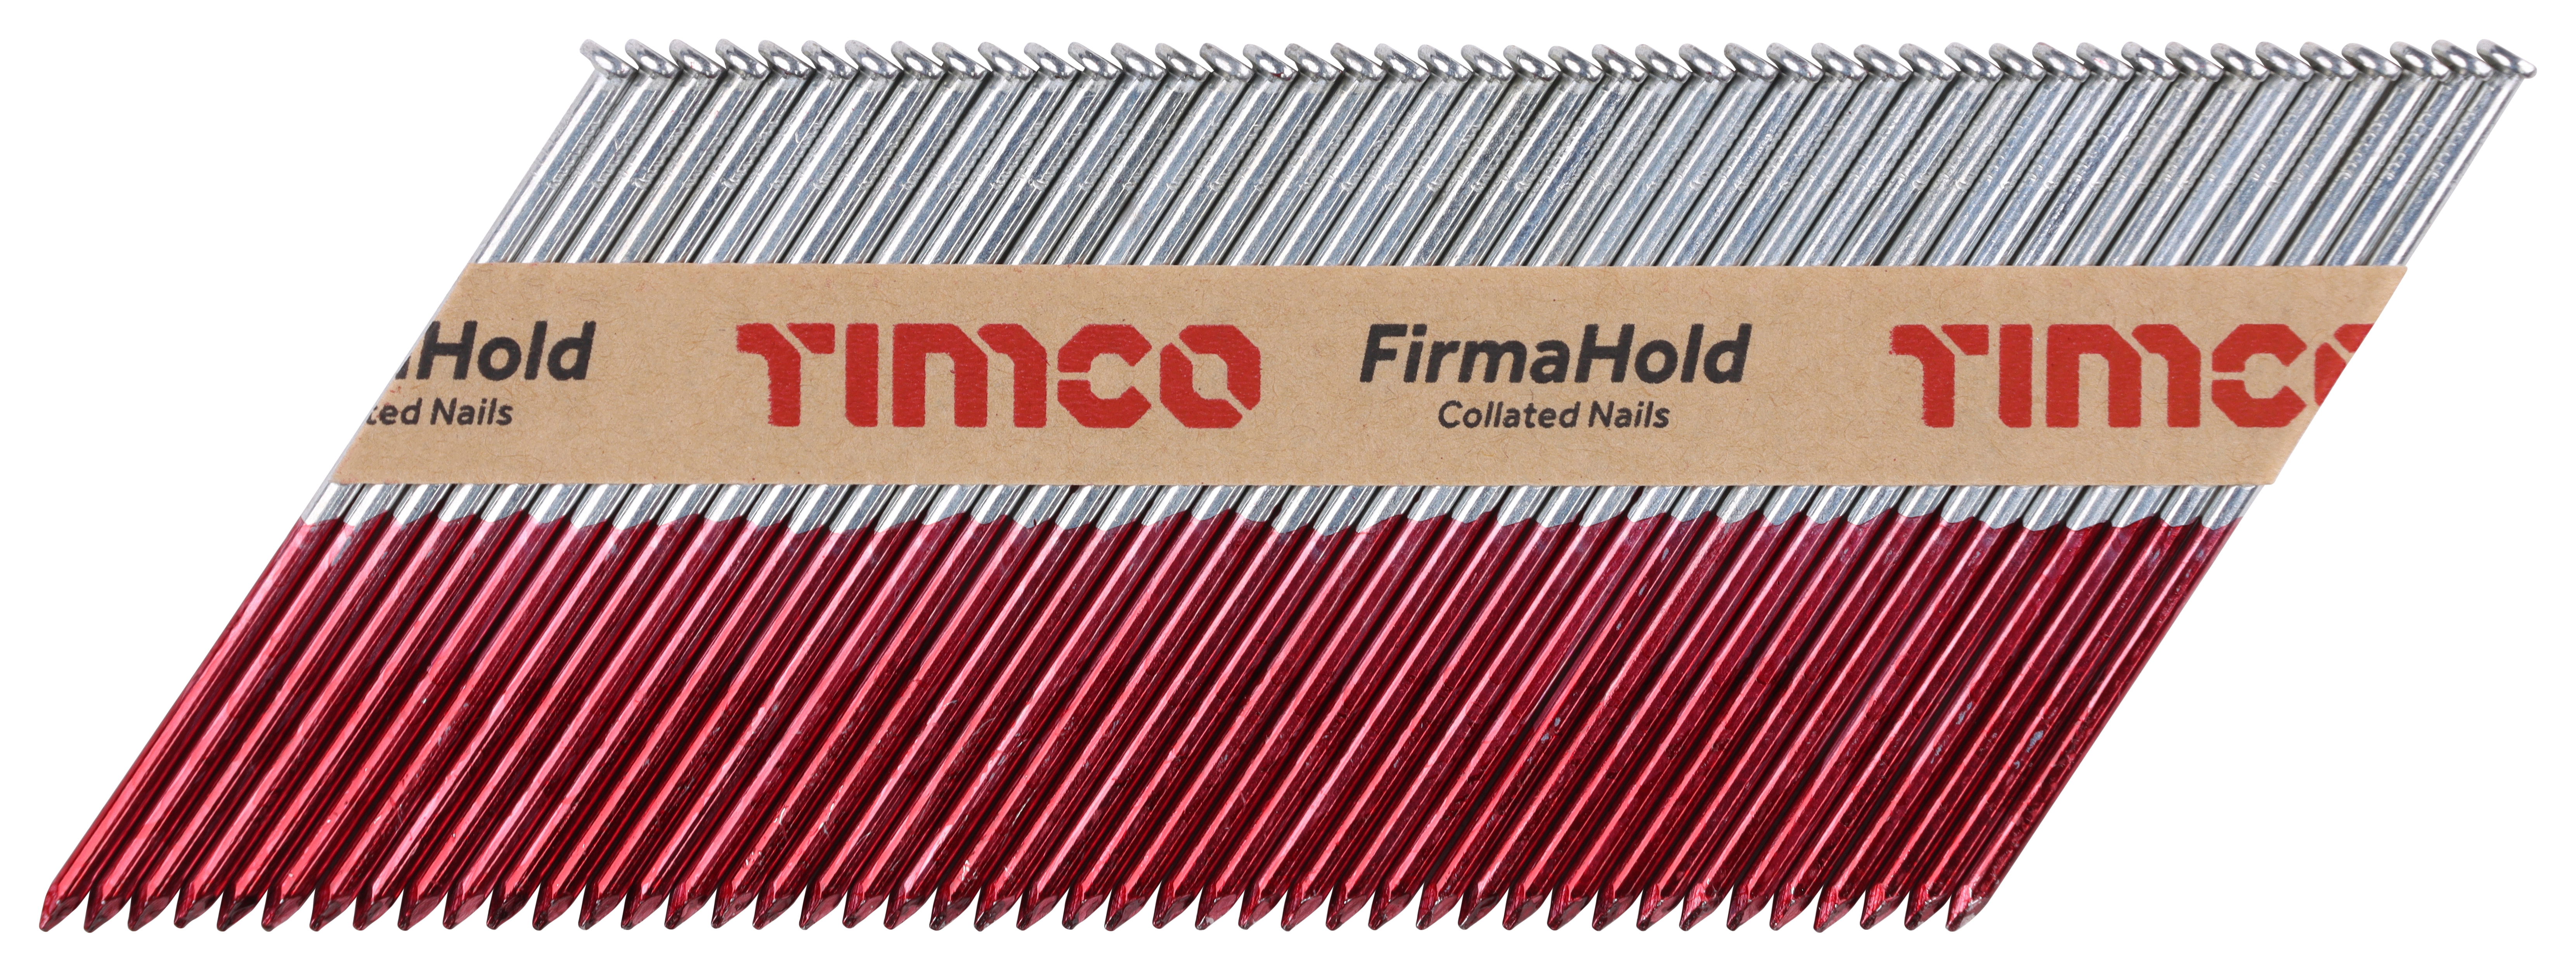 FirmaHold Plain Shank FirmaGalv Collated Clipped Head Nails - 3.1 x 90mm